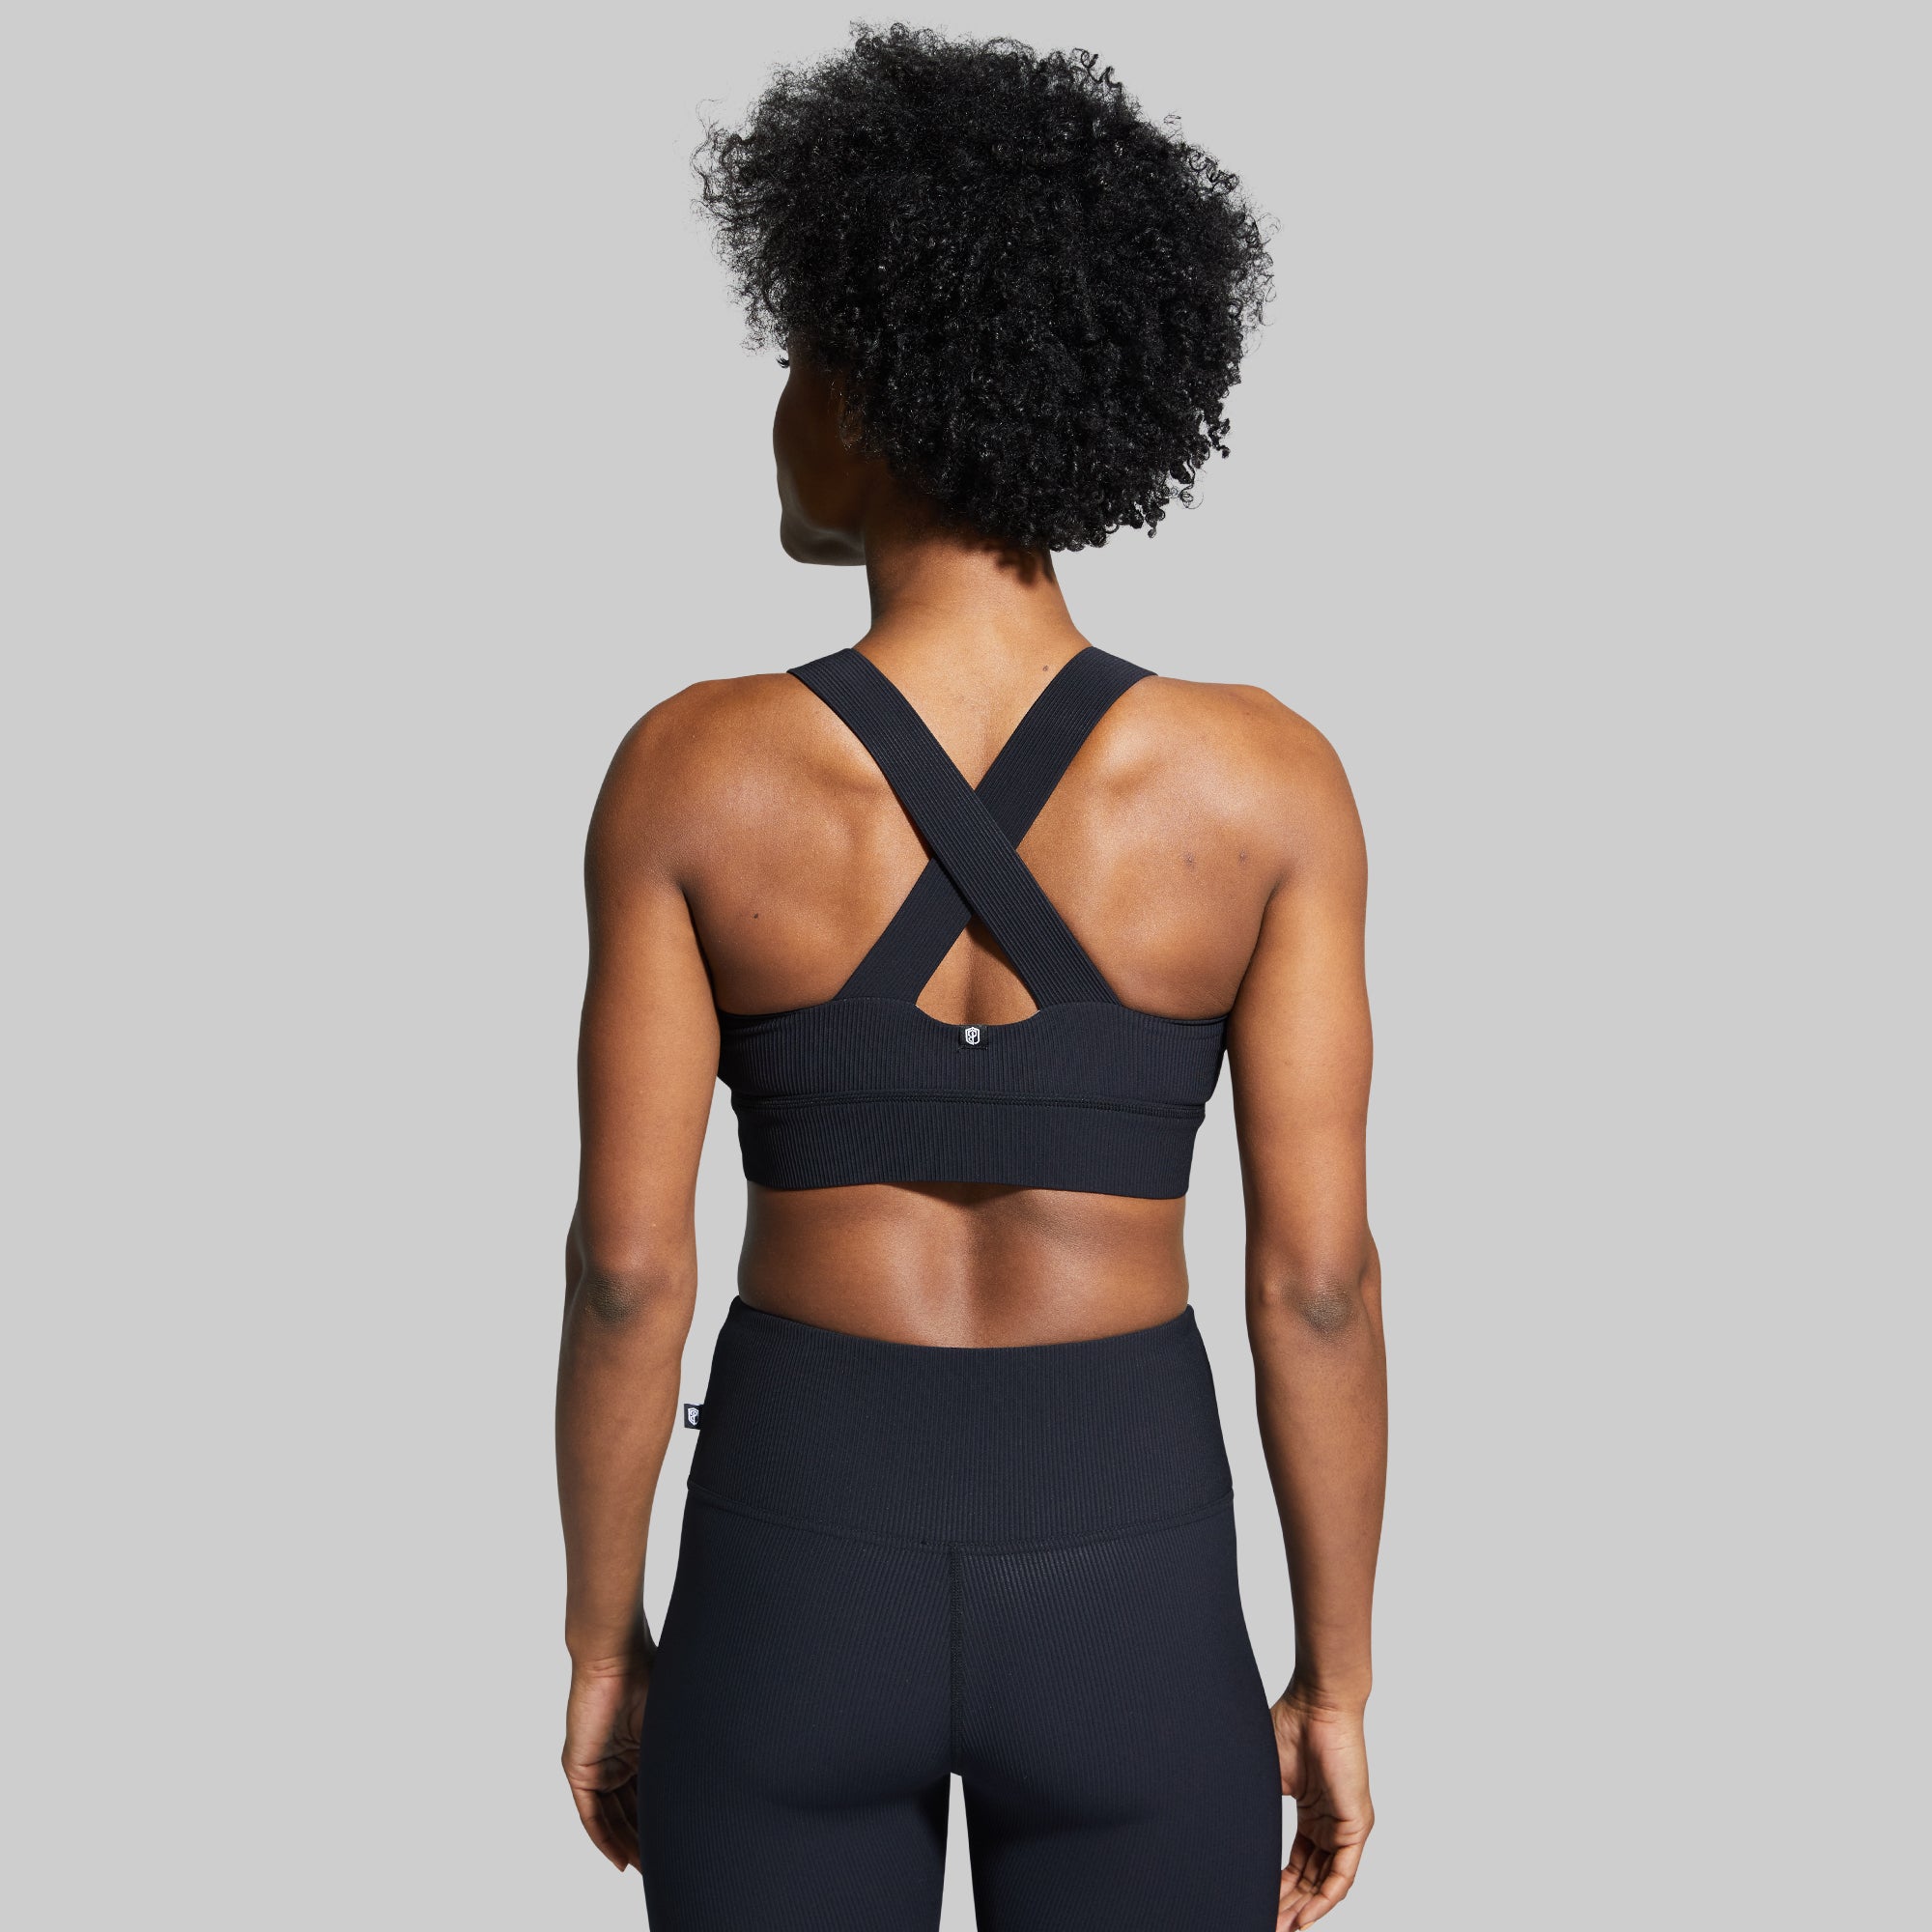 Born Primitive - Sports bras made to move with you, wherever that